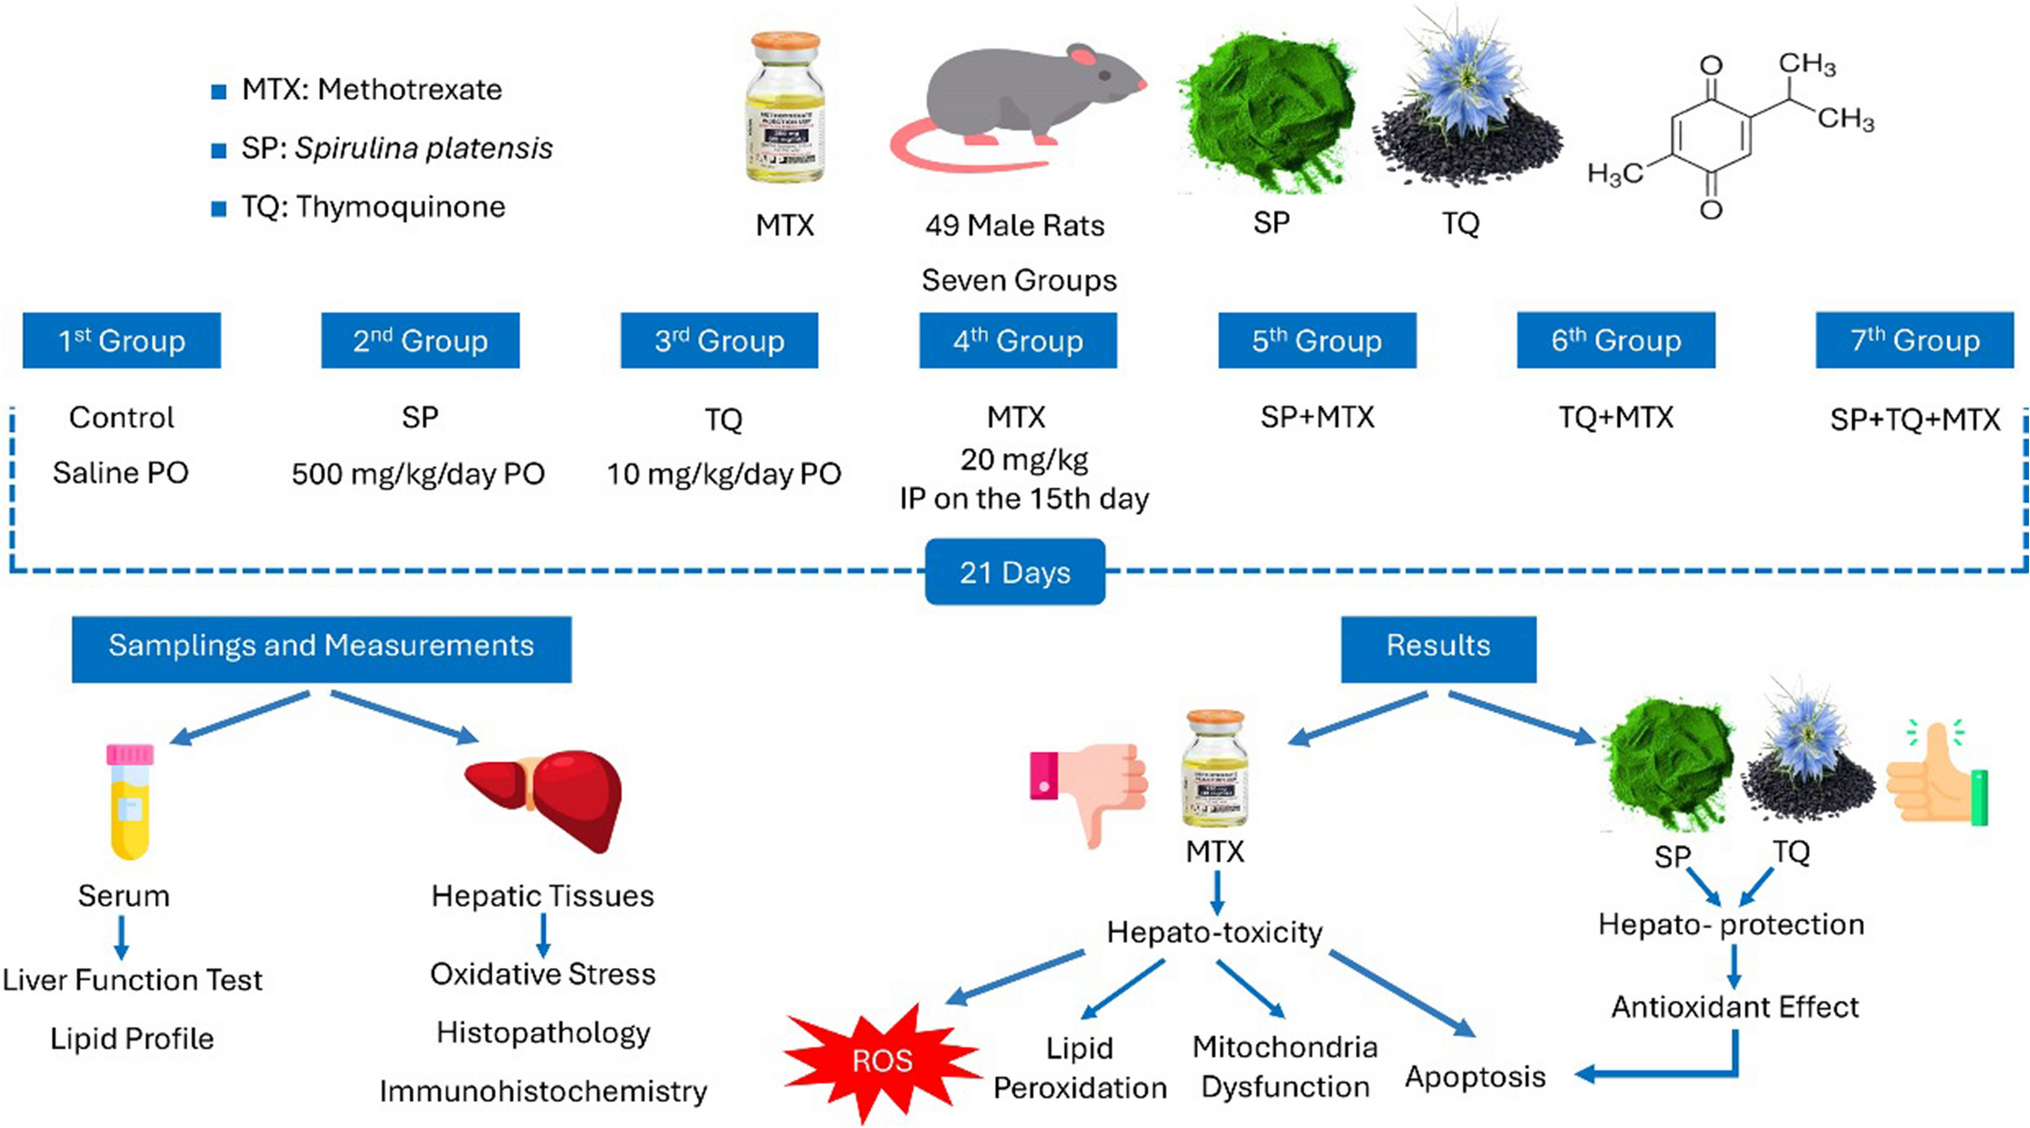 Spirulina and Thymoquinone Protect Against Methotrexate-Induced Hepatic Injury in Rats